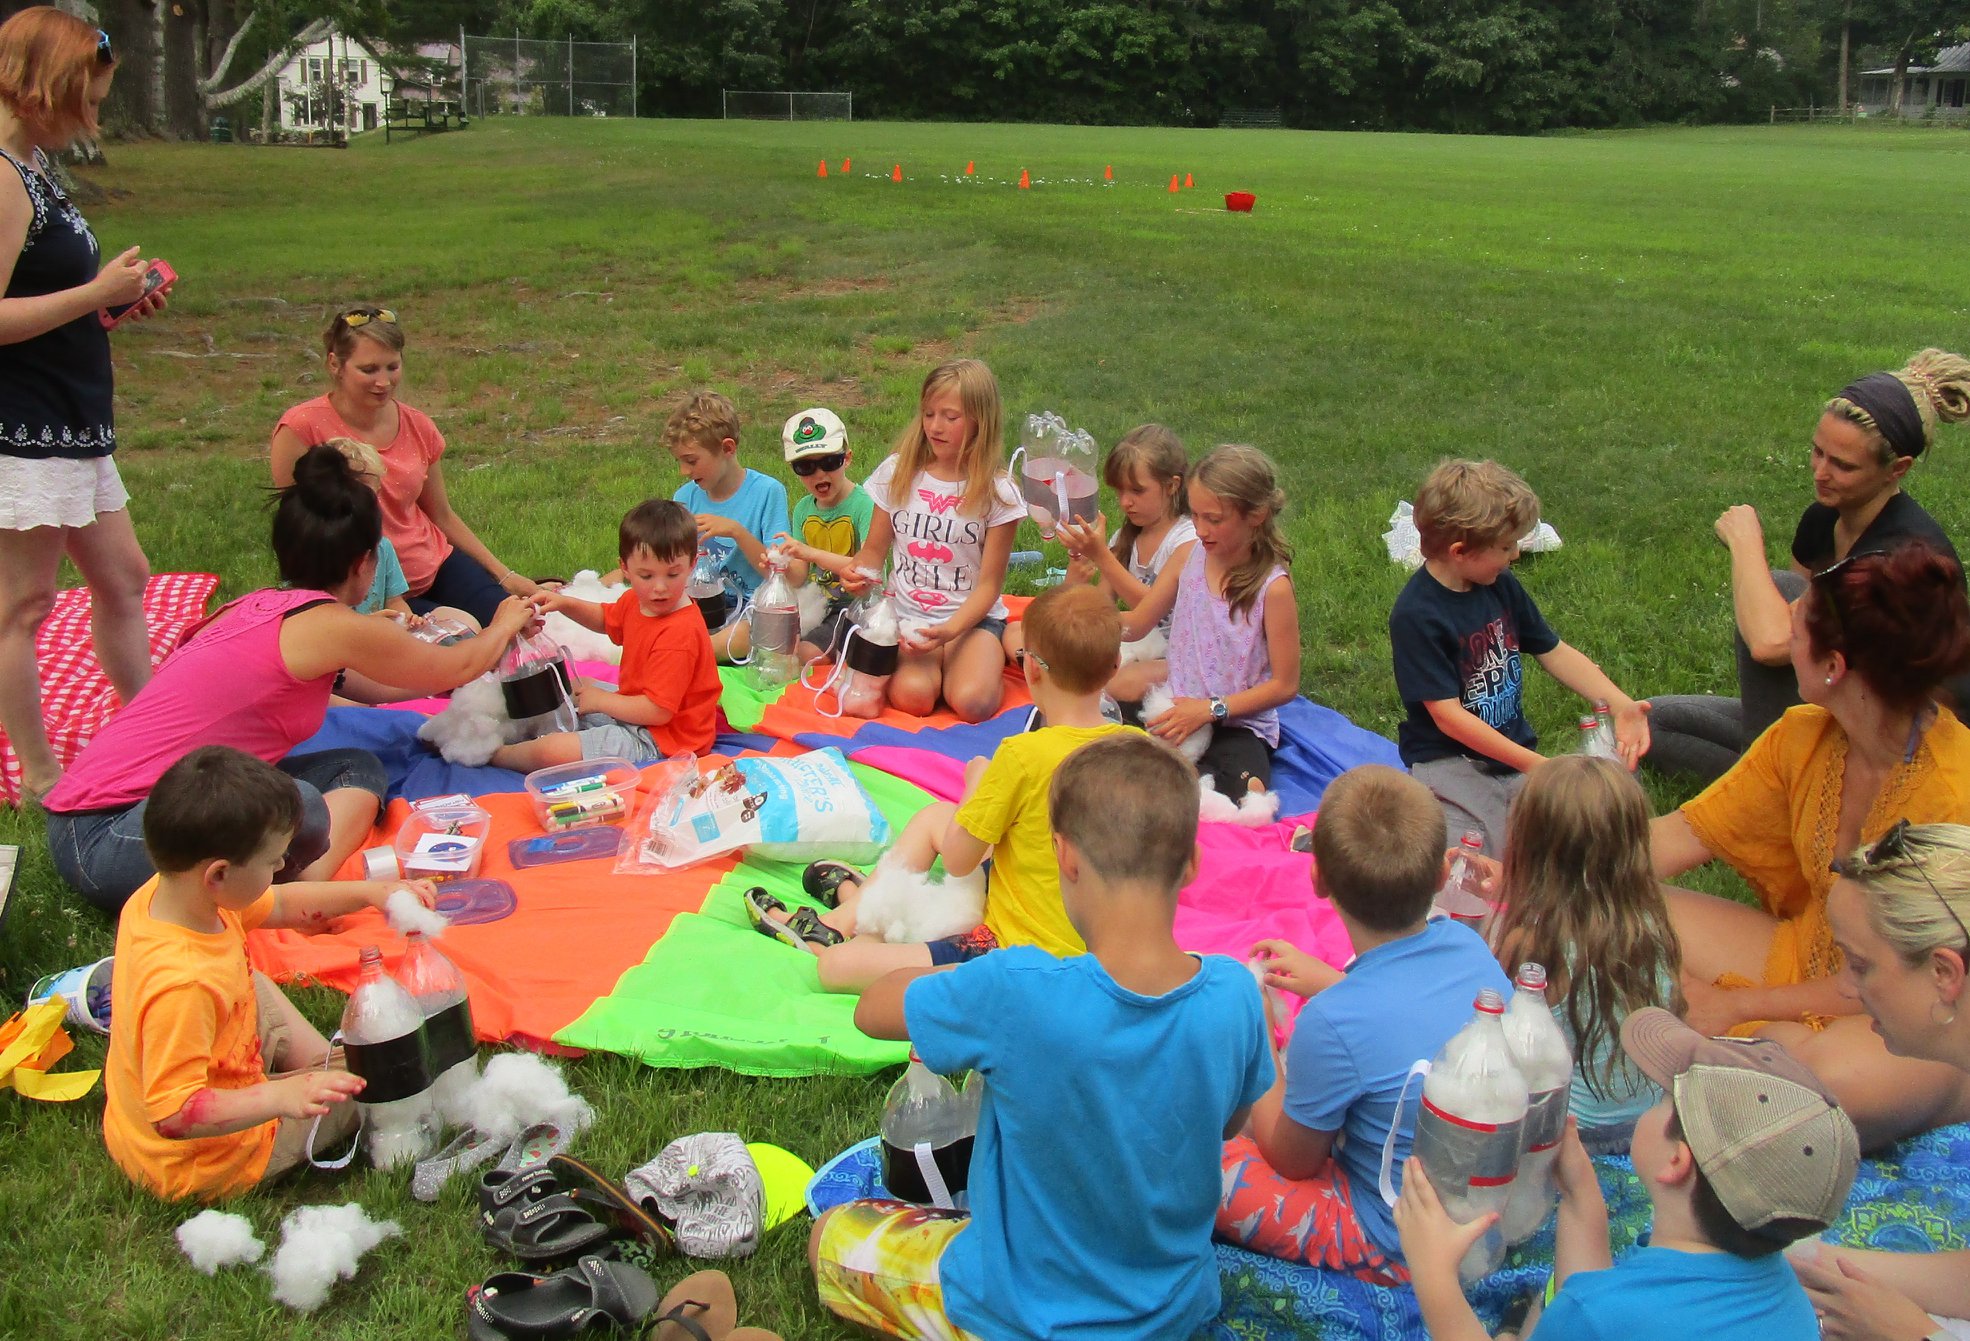 Wilton Library's Children's Library Offers Camp Half-Blood - Good Morning  Wilton